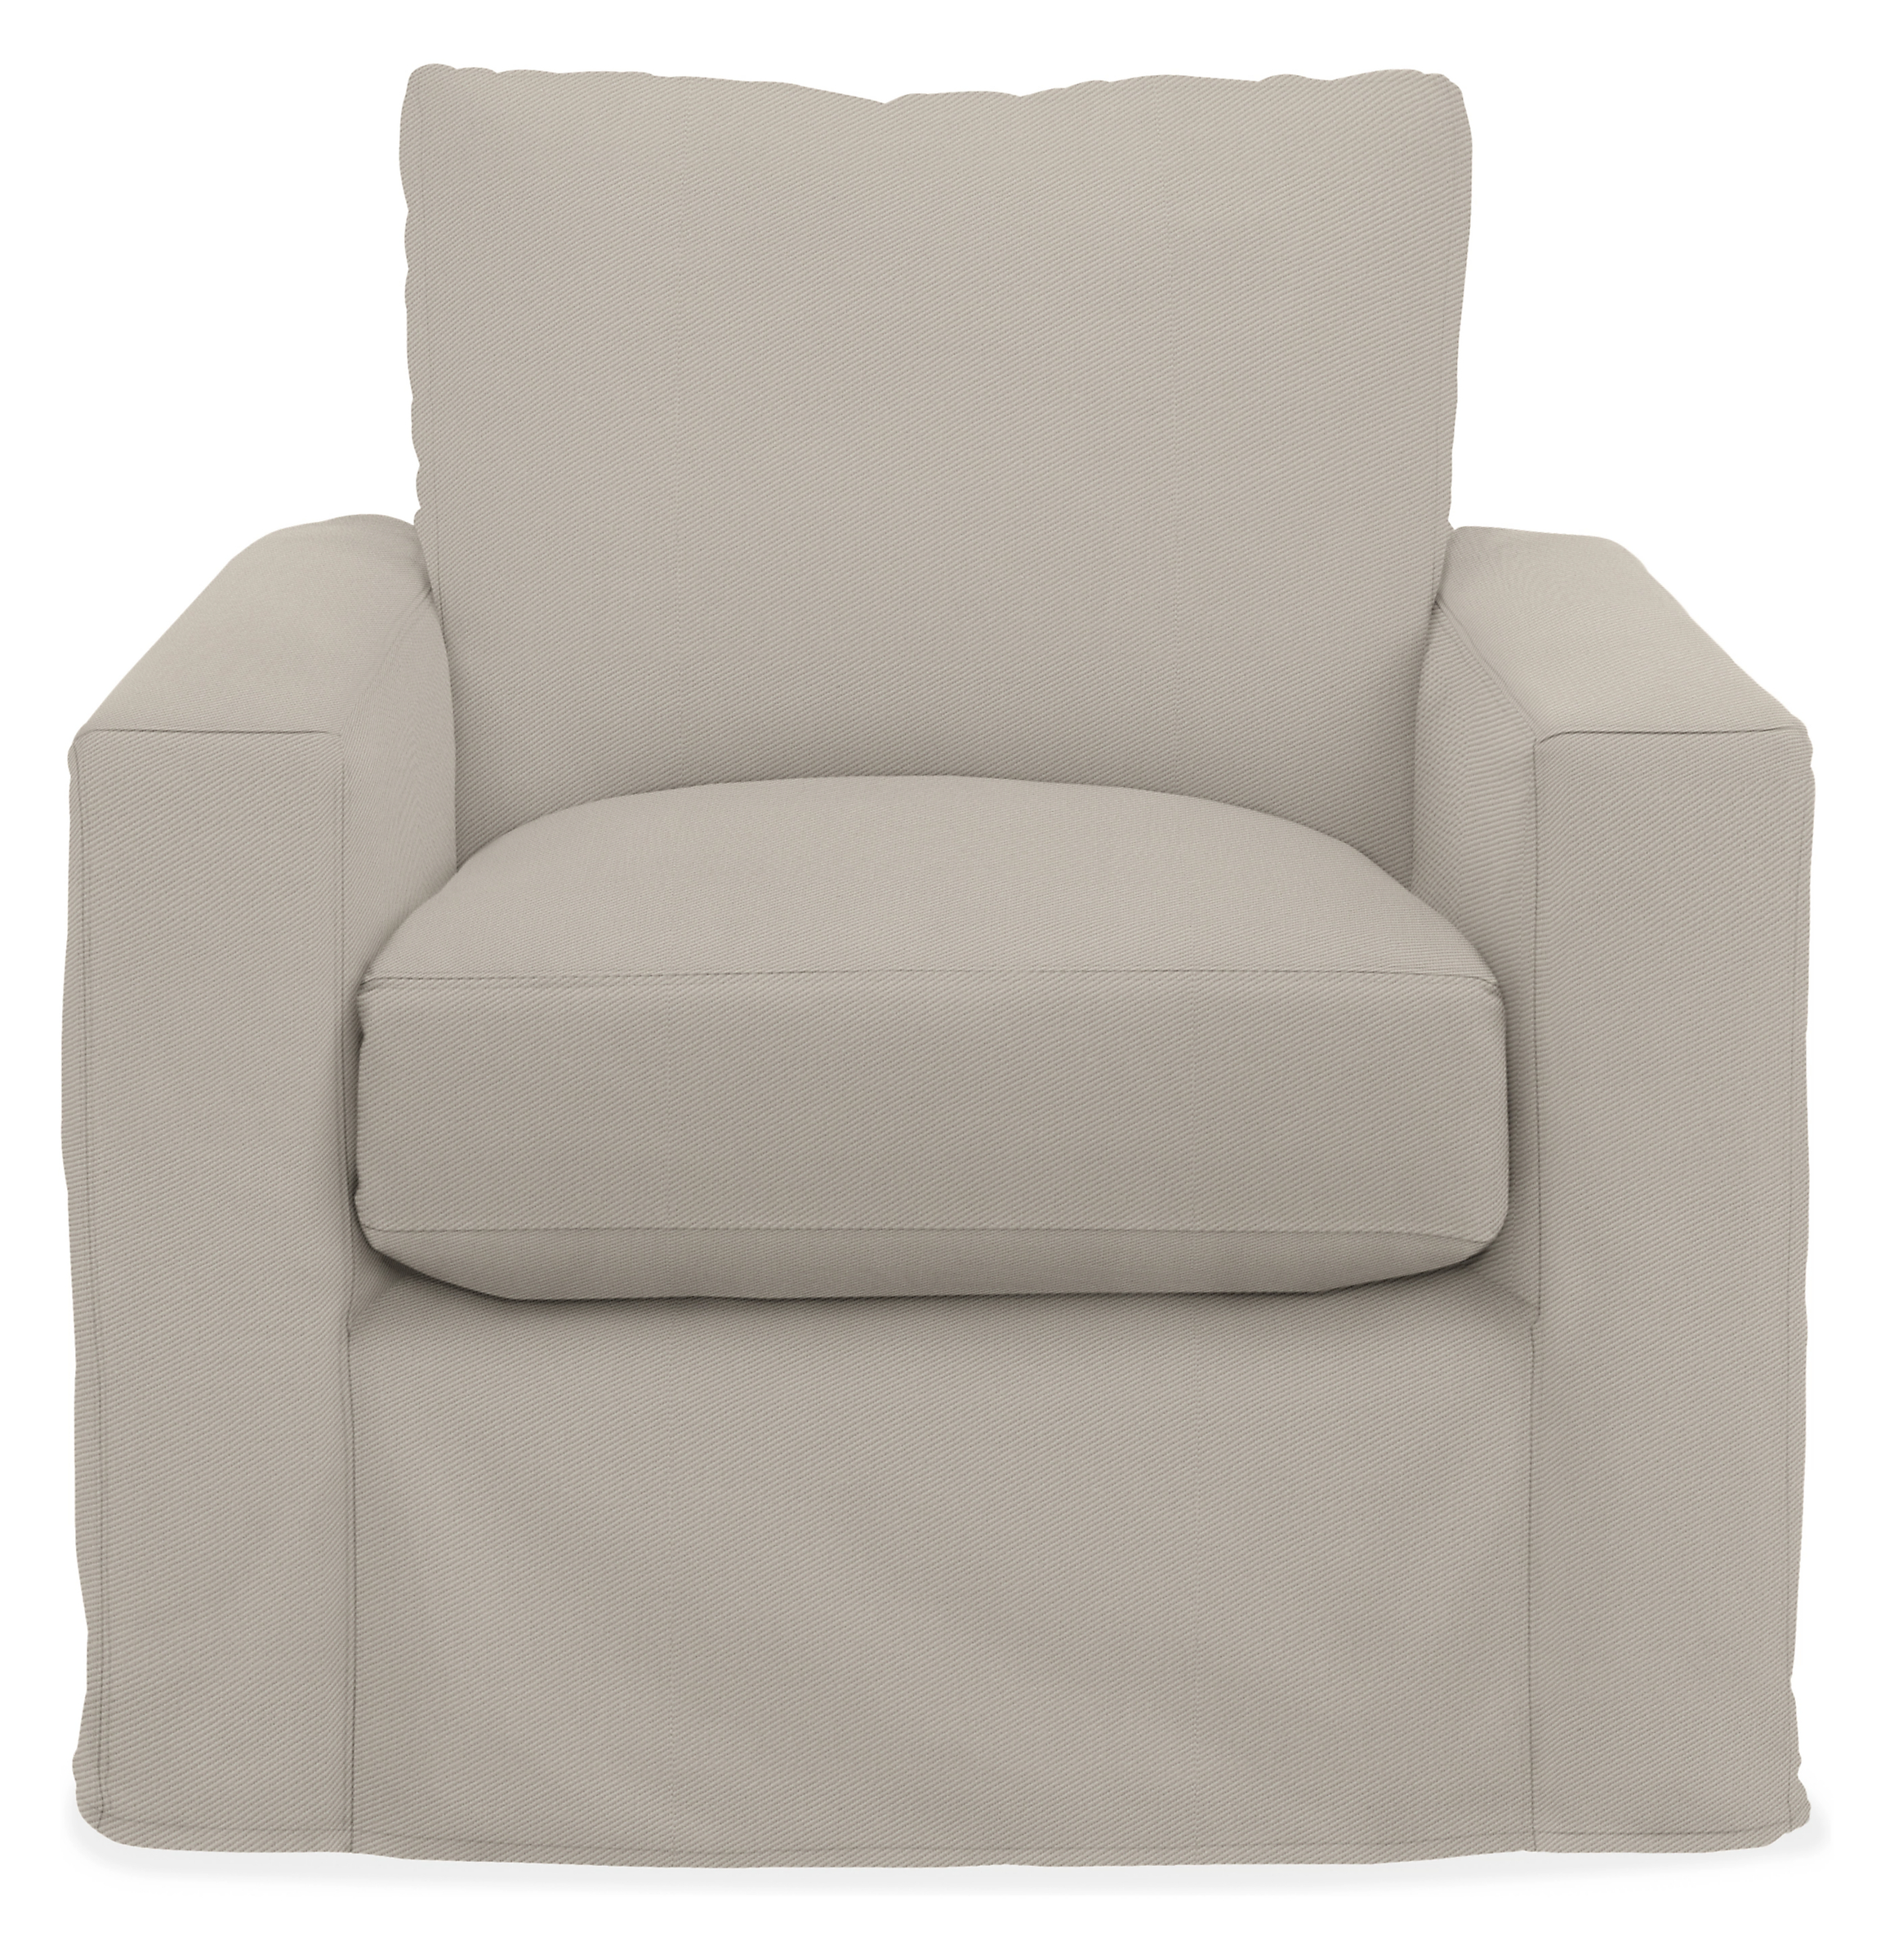 York Slipcover for Chair in Daryl Cement